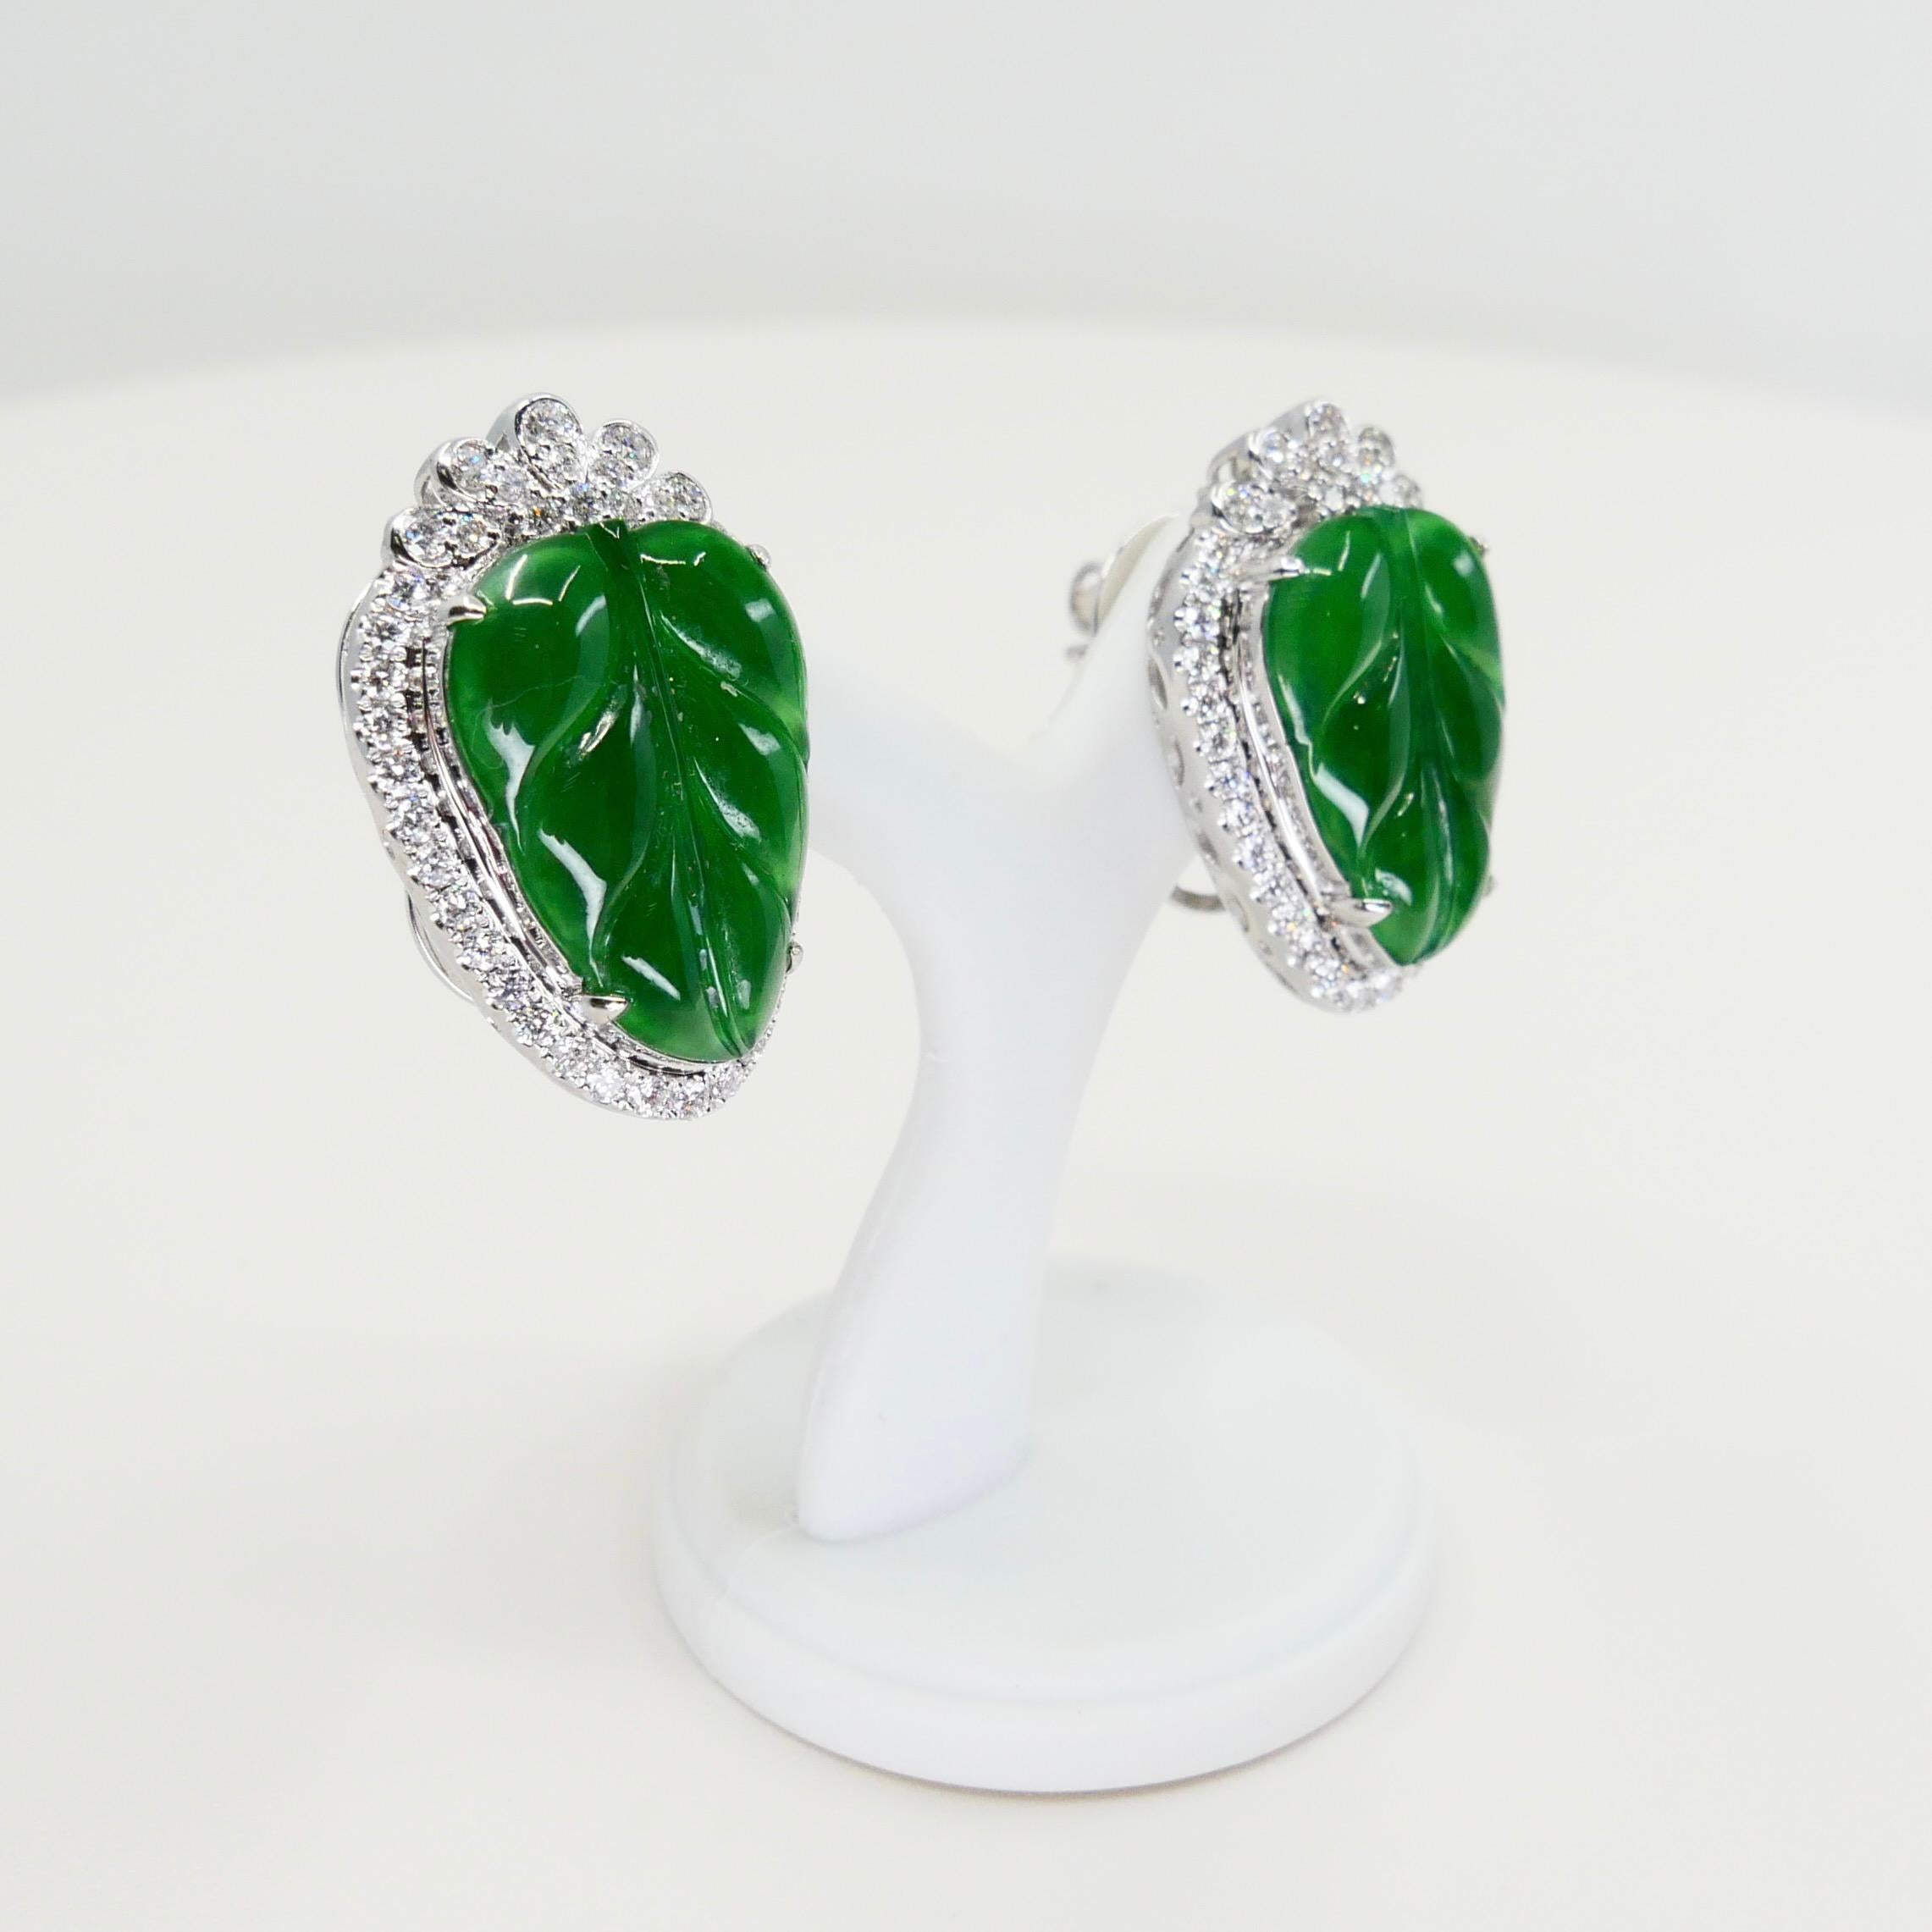 Certified Icy Imperial Green Jade and Diamond Earrings, Collector's Quality For Sale 7